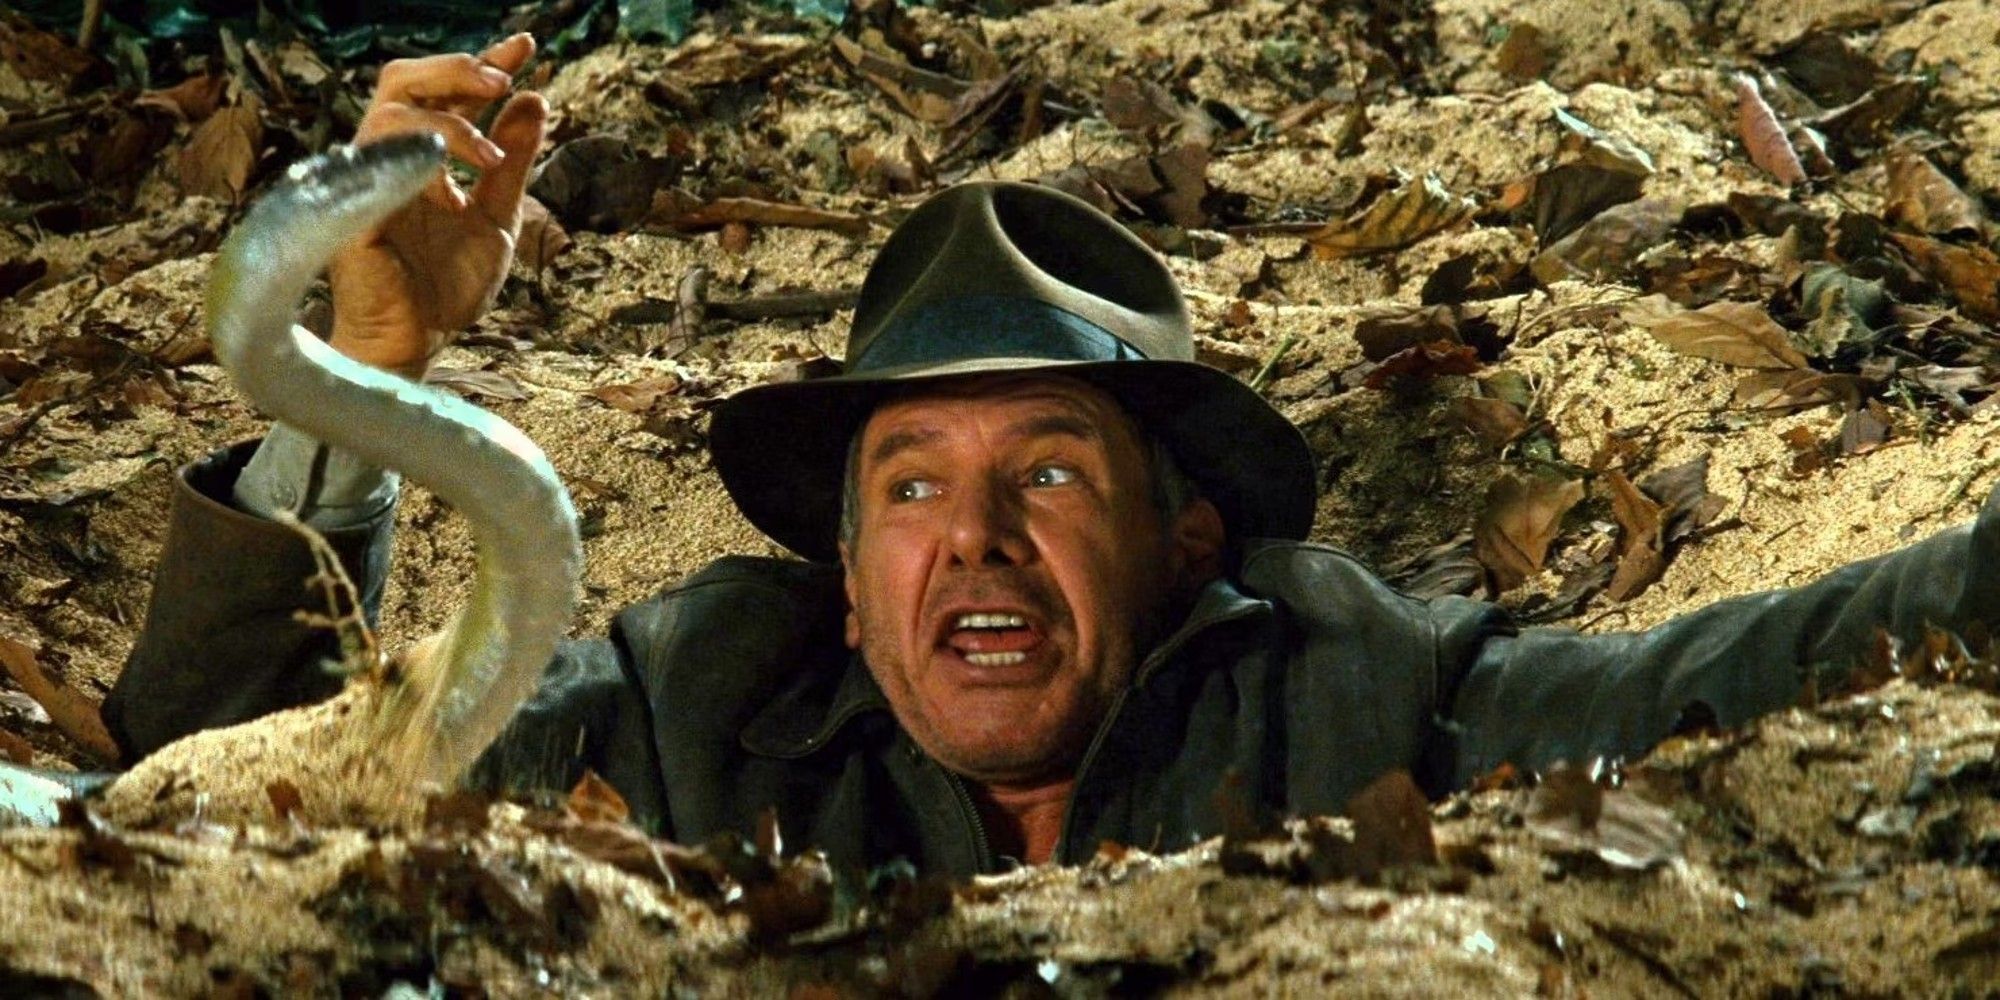 Indiana Jones in a pit full of snakes, looking scared